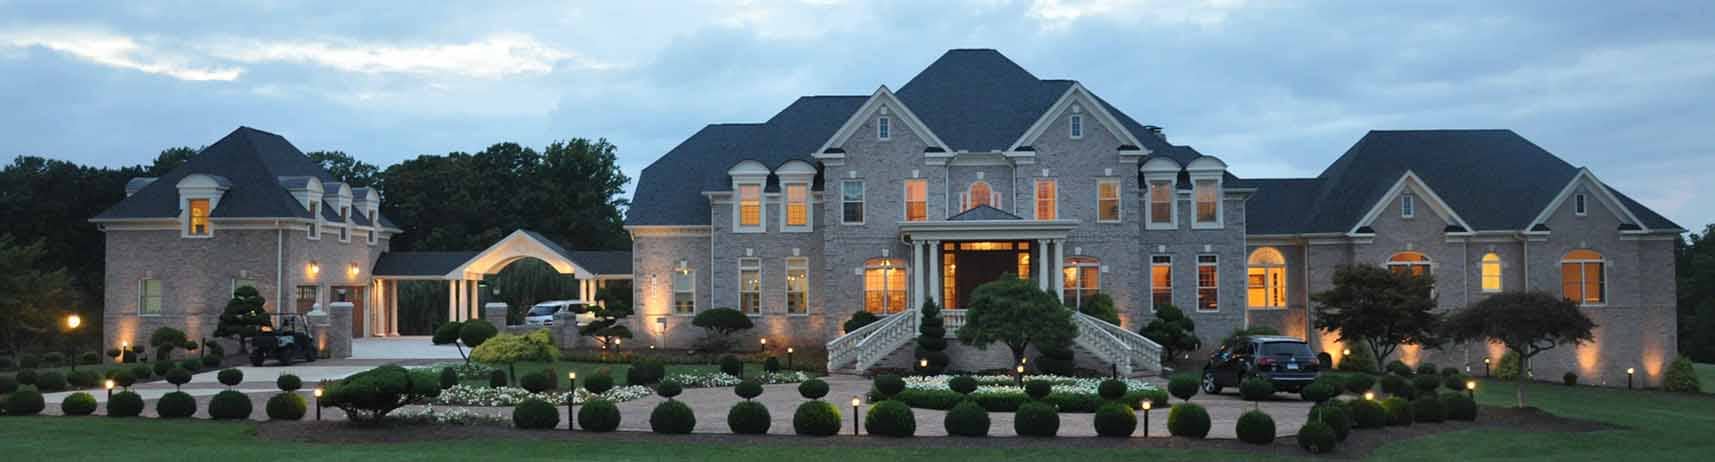 Potomac Home Builder, Custom Home Builder and Home Remodeling Contractor